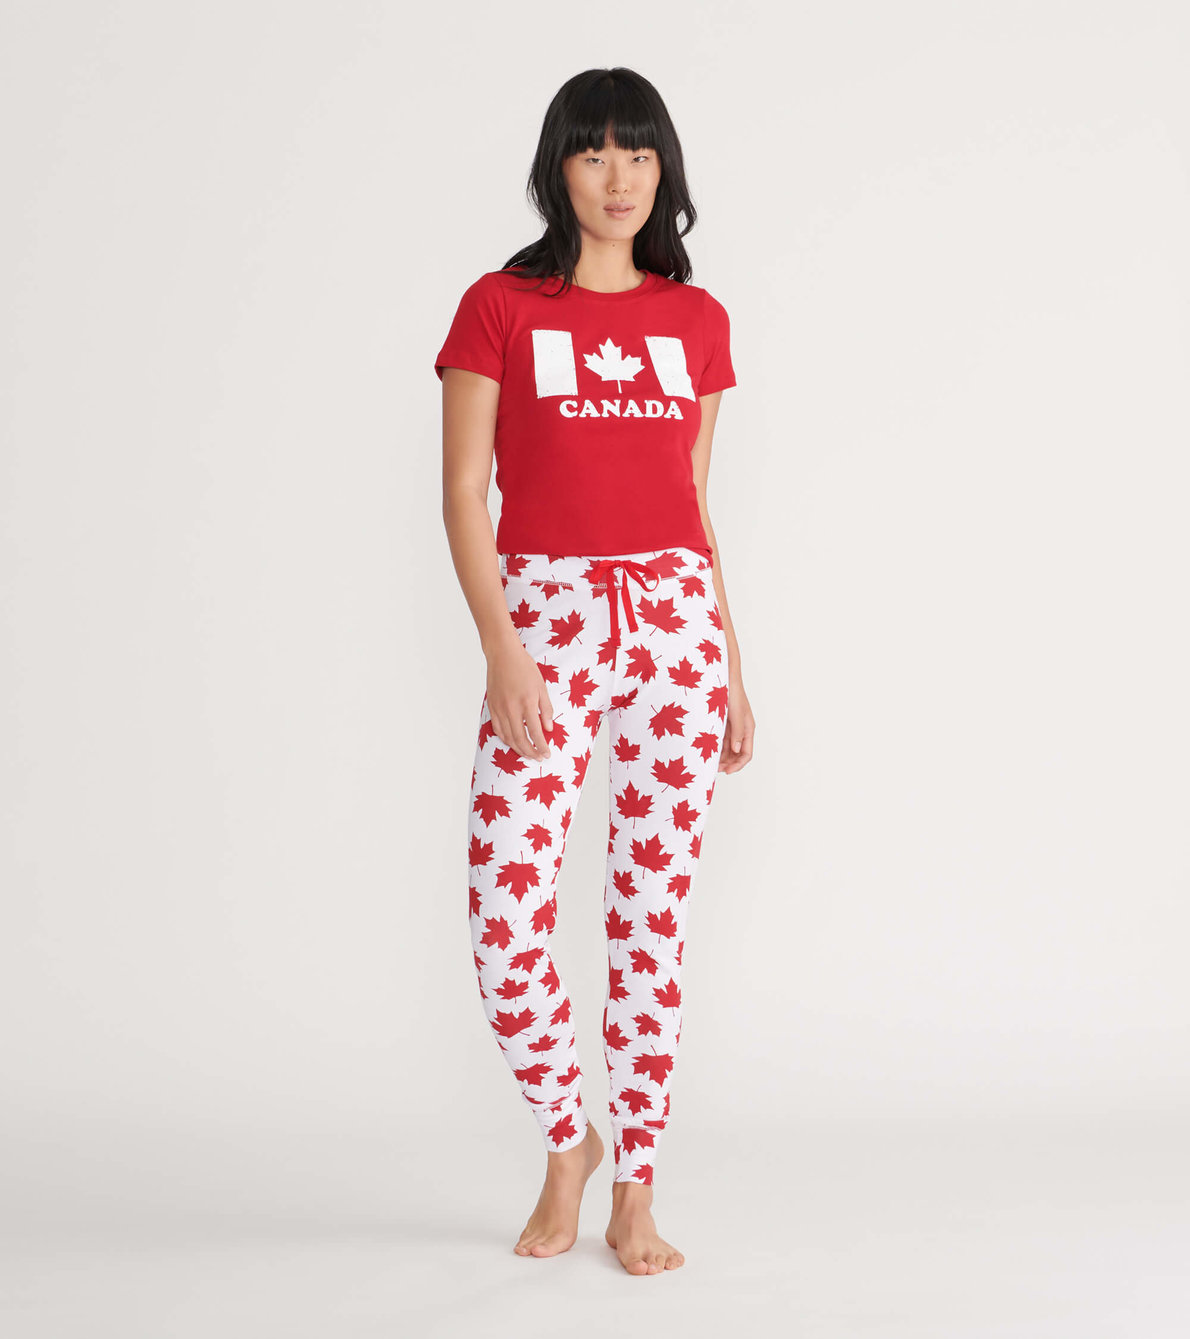 View larger image of Made in Canada Women's Tee and Leggings Pajama Separates